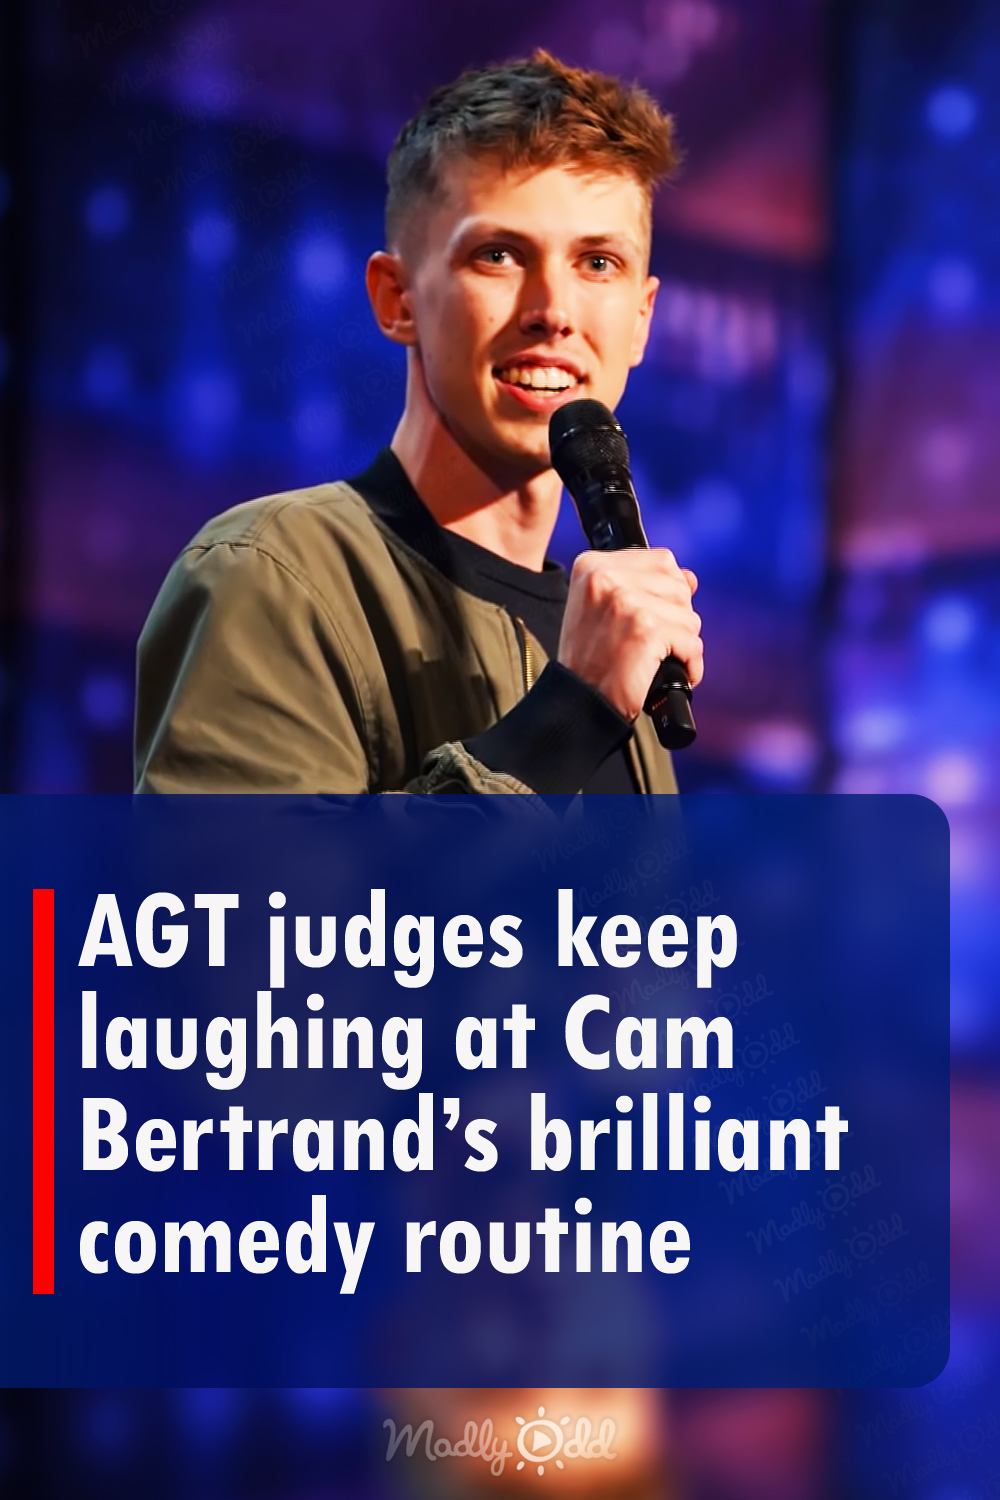 AGT judges keep laughing at Cam Bertrand’s brilliant comedy routine